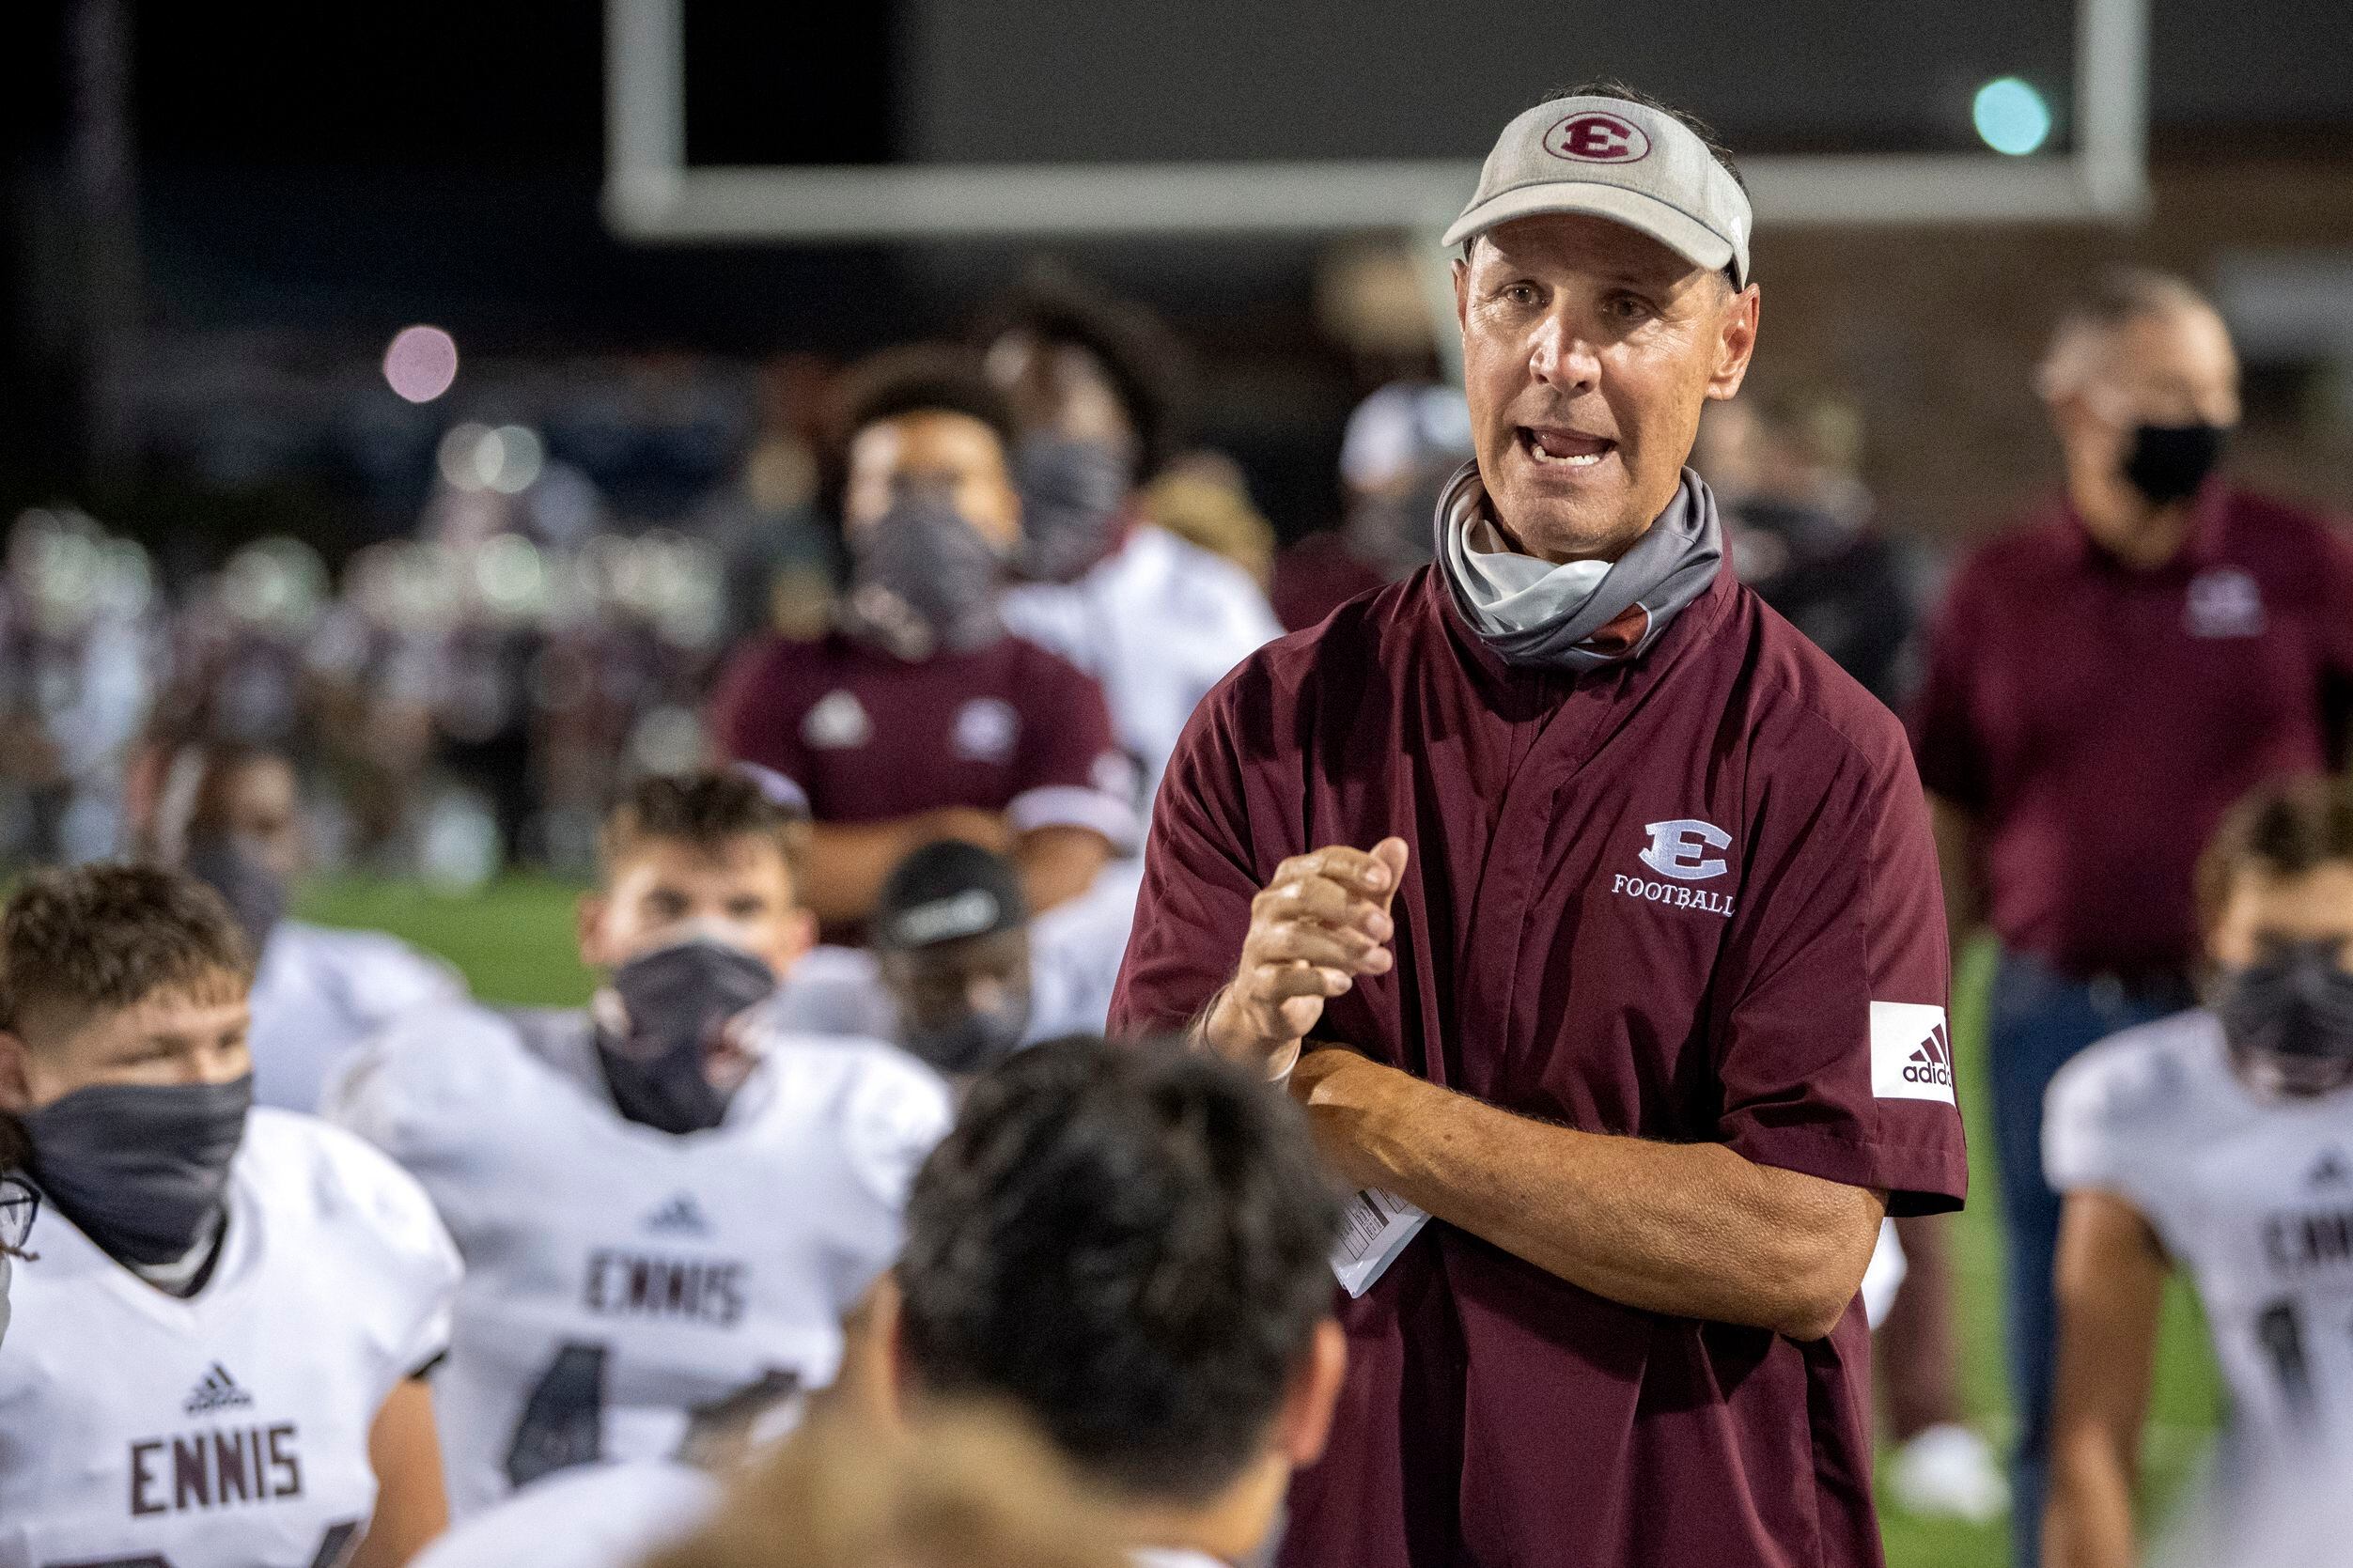 Ennis head coach Sam Harrell talks to his players after their 52-21 win over Red Oak in a...